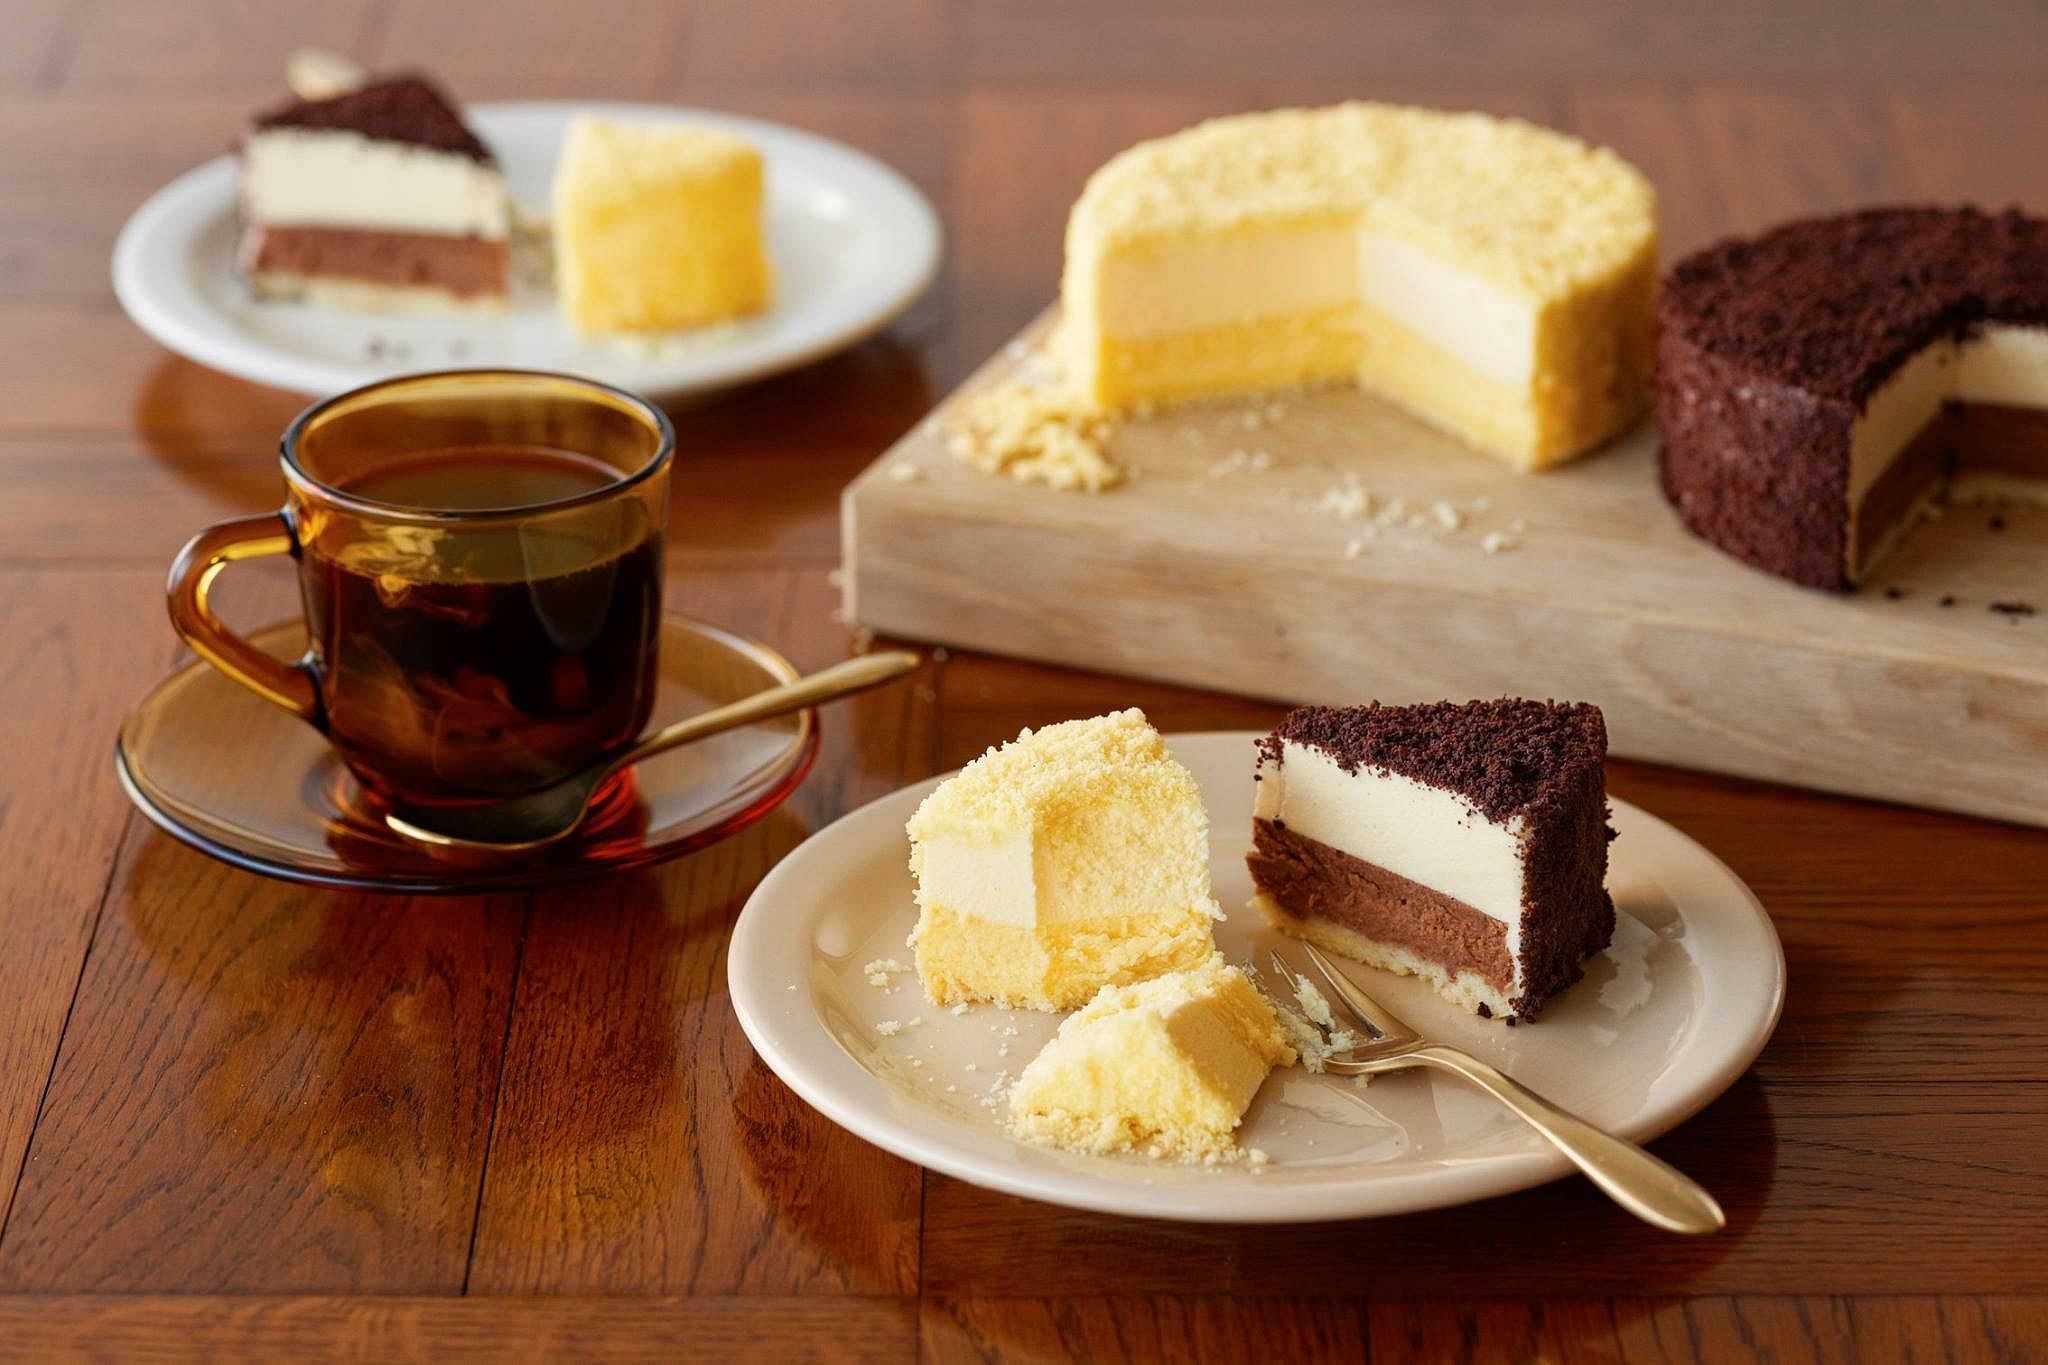 Cheesecake, International Cheese Day, Basque Burnt Cheesecake, Cheese, Cake, Delivery, Takeaway, Dessert, Lifestyle, Gourmet